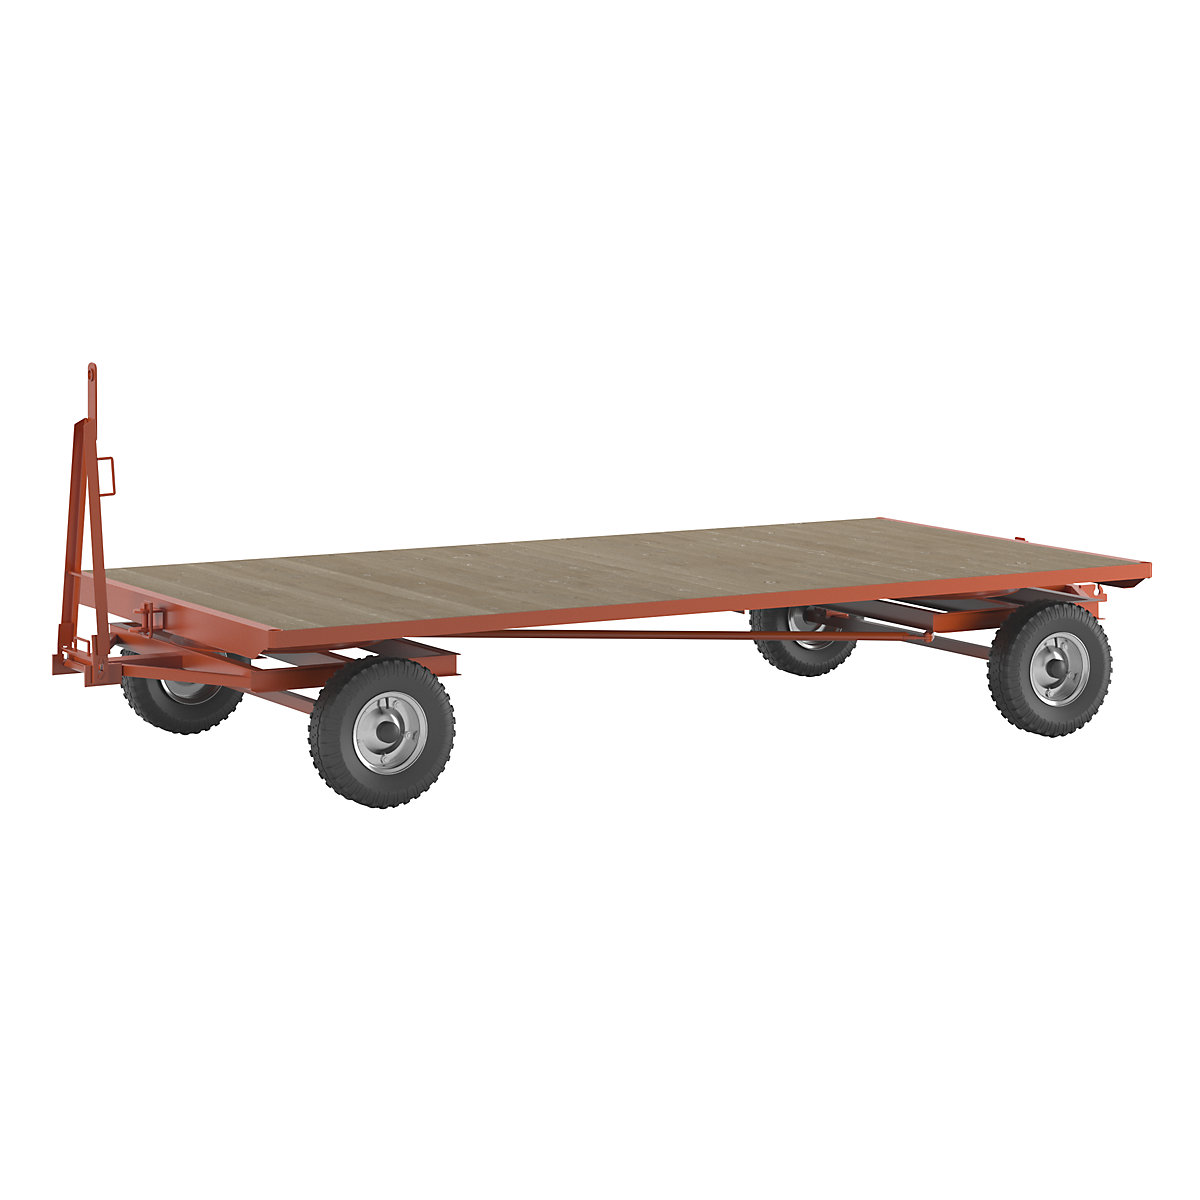 Trailer, 4-wheel double turntable steering, max. load 5 t, platform 4.0 x 2.0 m, pneumatic tyres-15